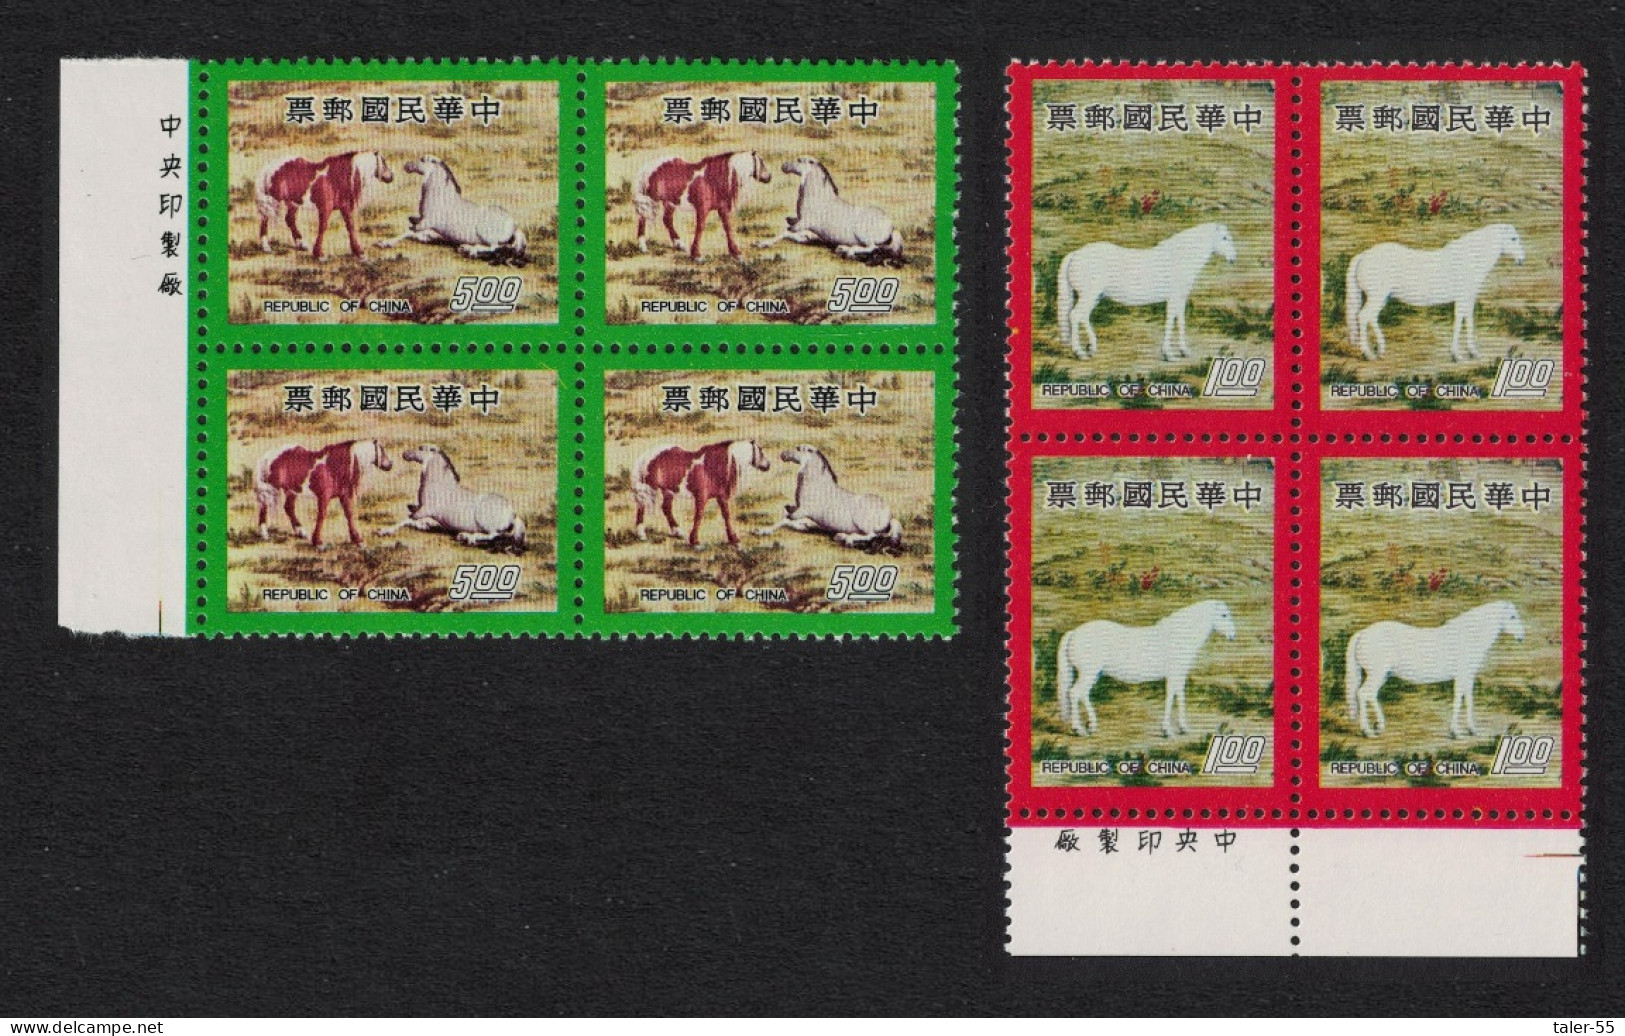 Taiwan Chinese Year Of The Horse 2v Blocks Of 4 1977 MNH SG#1180-1181 MI#1219-1220 - Neufs